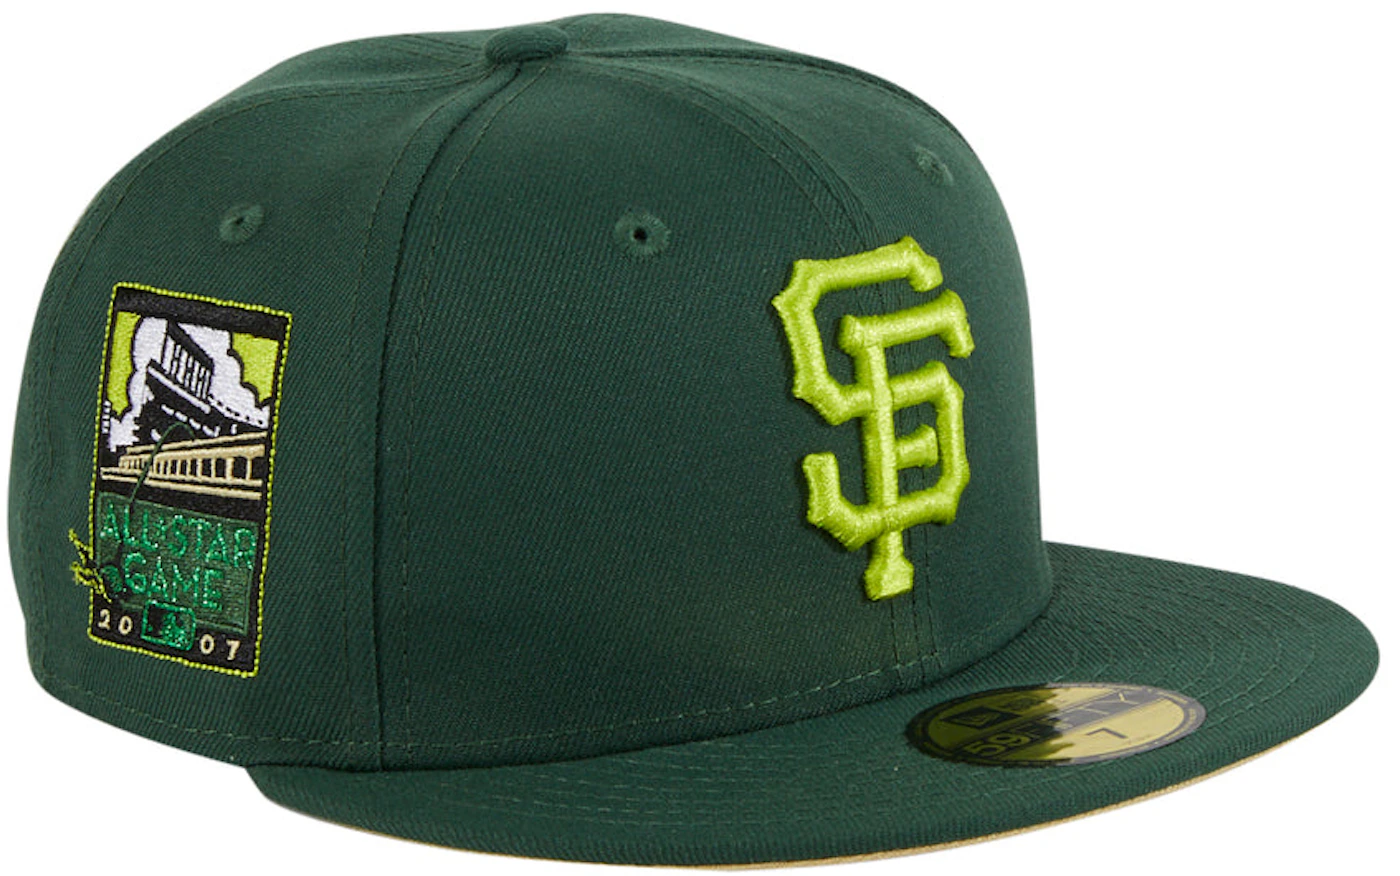 San Francisco Giants Infrared New Era 59FIFTY Fitted Cap sz 8 hat